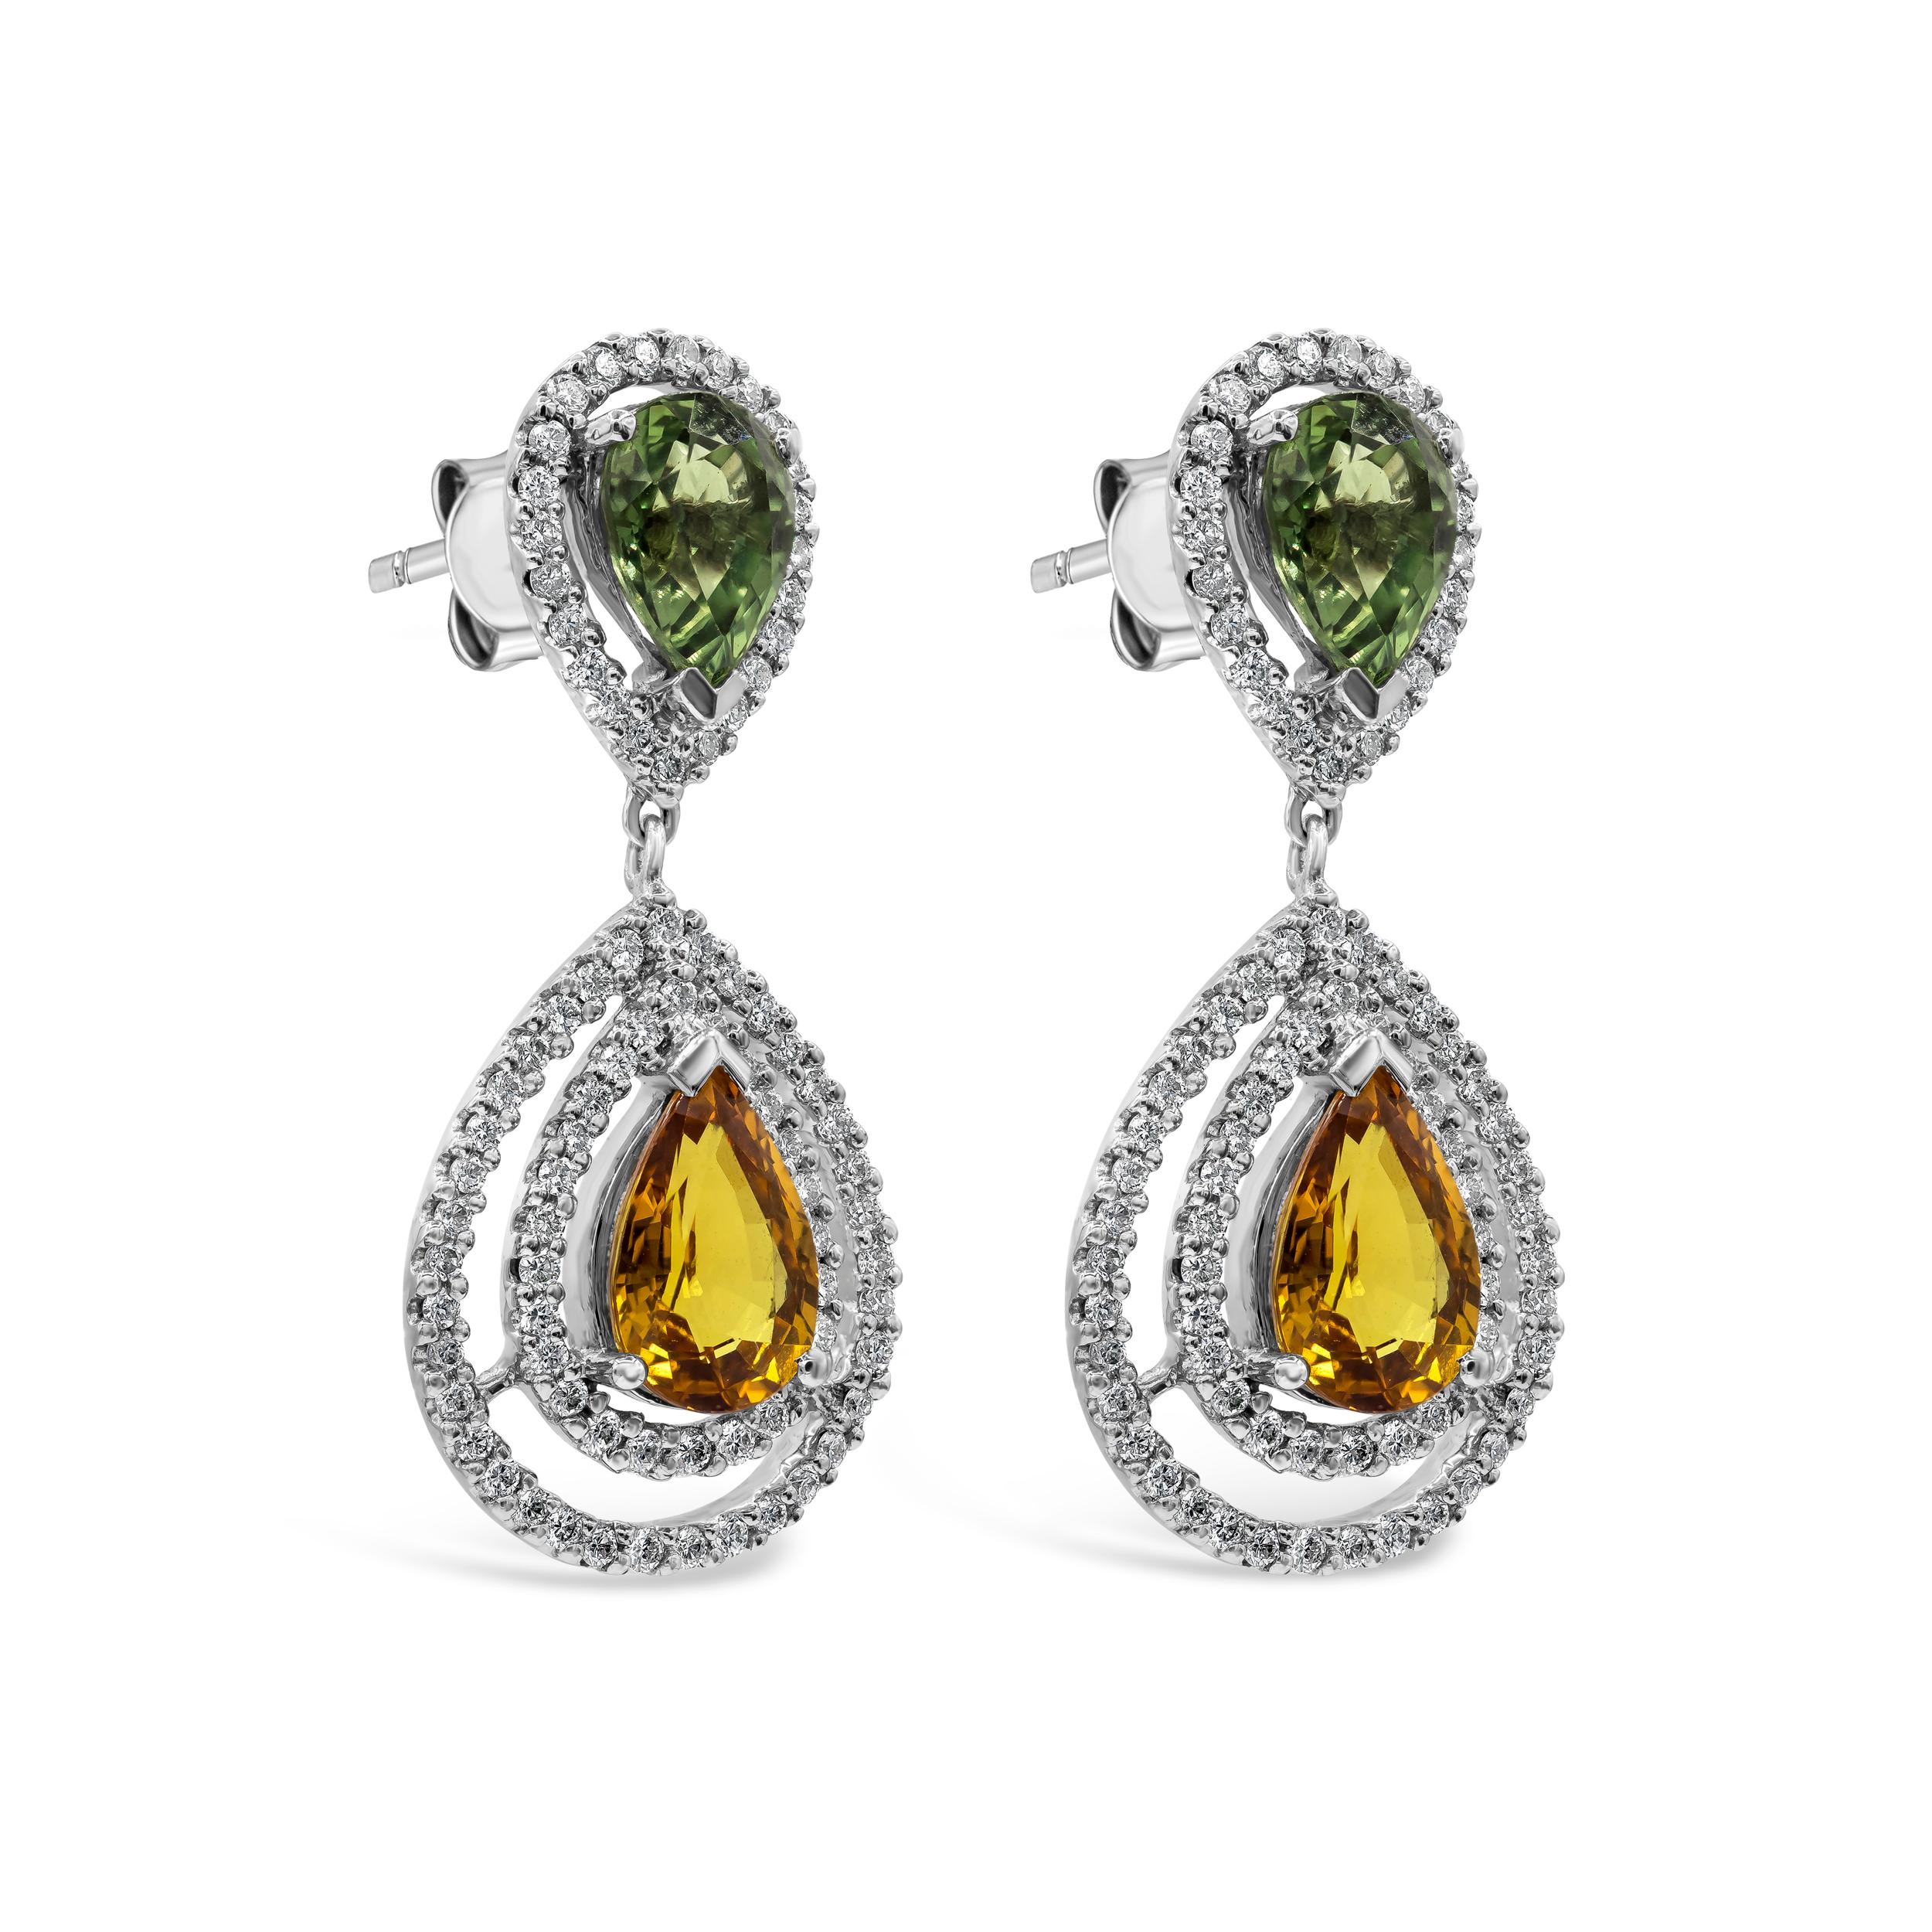 Each earring features a color-rich pear shape orange sapphire, set in an open-work double halo design. Suspended on a green pear shape sapphire halo. Sapphires weigh 6.15 carats total; diamonds weigh 0.92 carats total. Made in 18k white gold.

Style